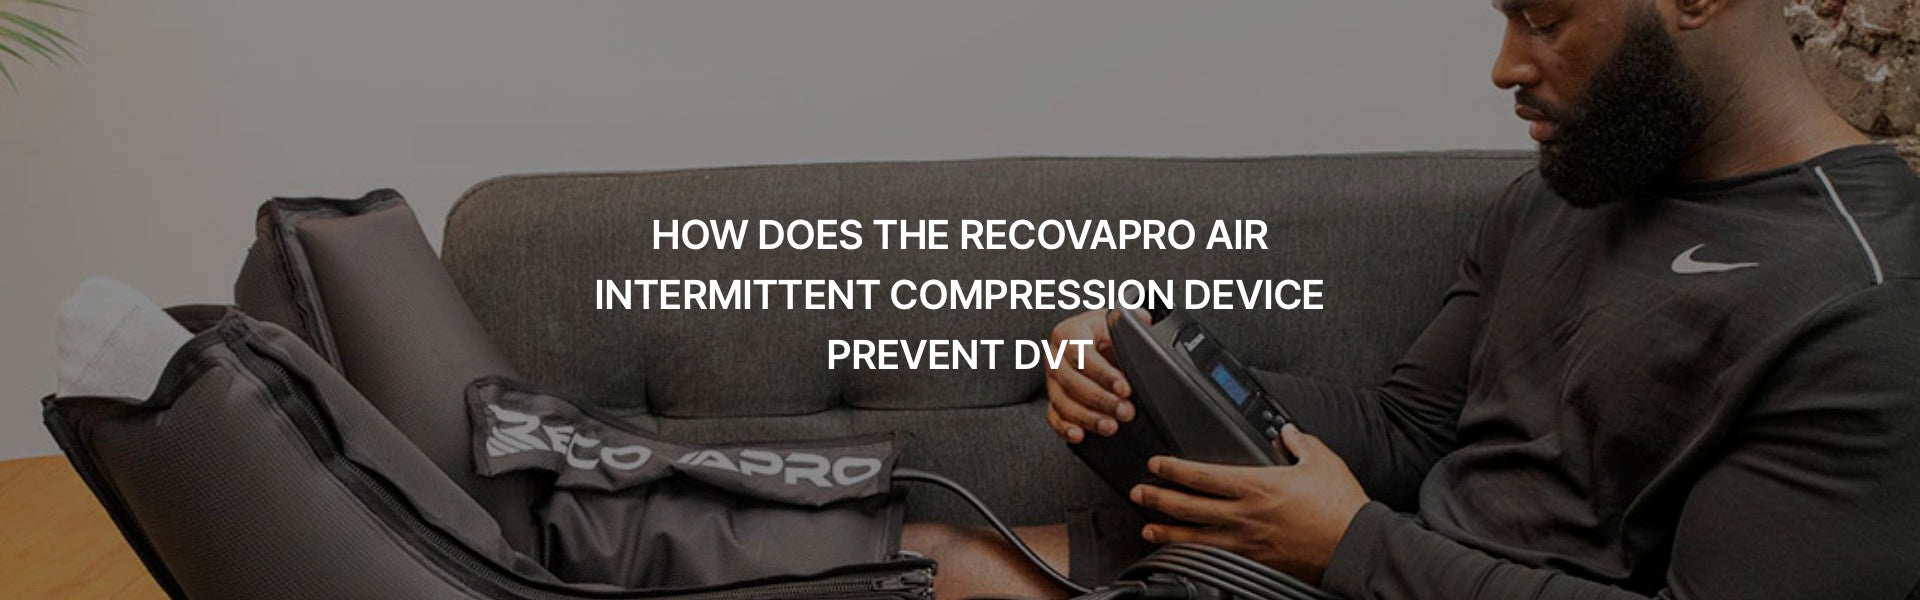 HOW DOES THE RECOVAPRO AIR INTERMITTENT COMPRESSION DEVICE PREVENT DVT